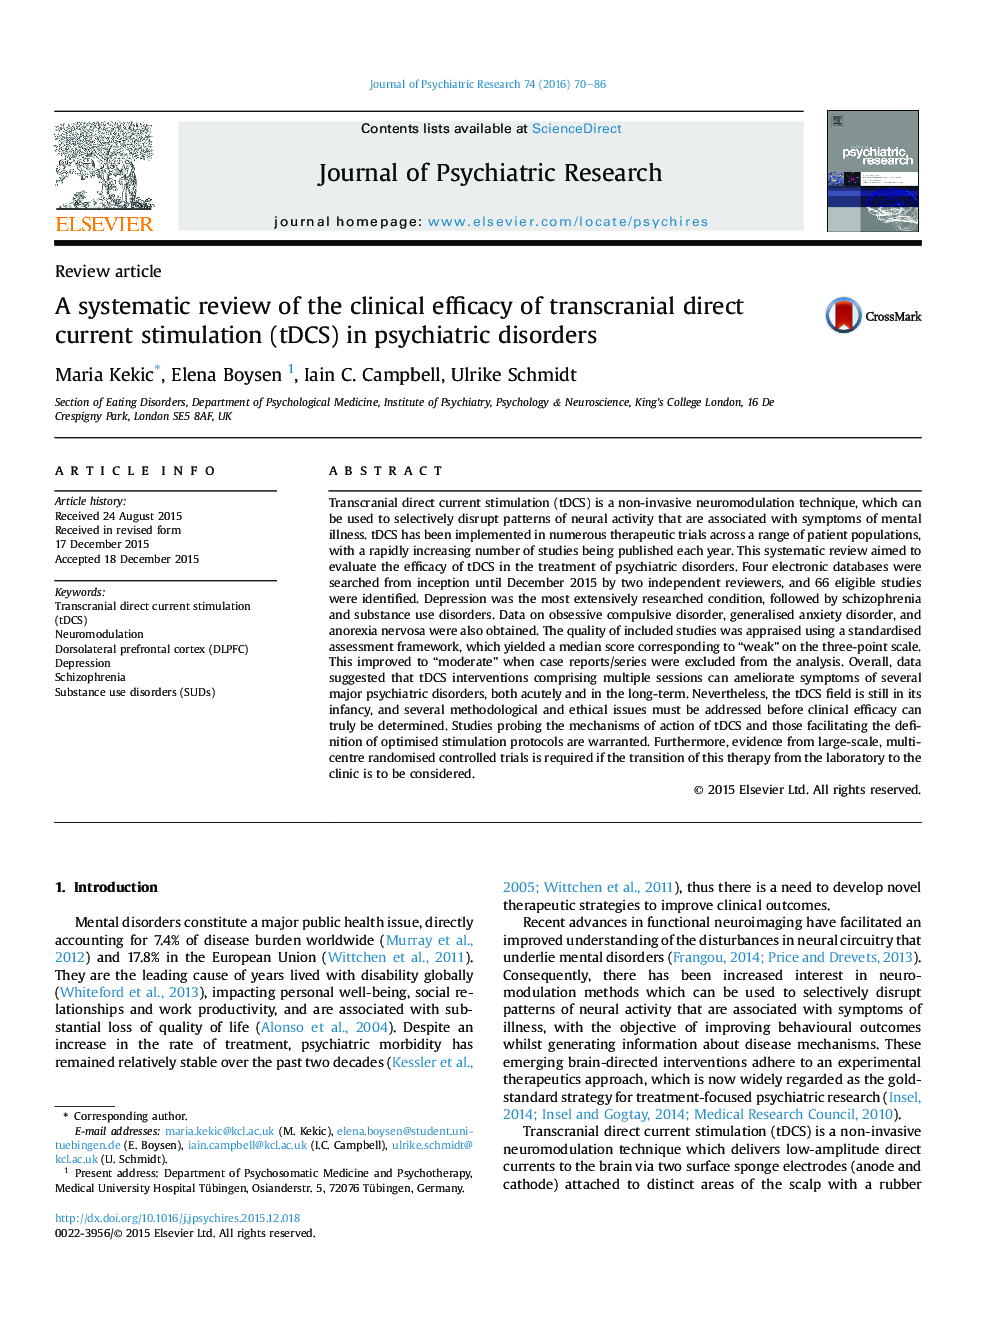 A systematic review of the clinical efficacy of transcranial direct current stimulation (tDCS) in psychiatric disorders